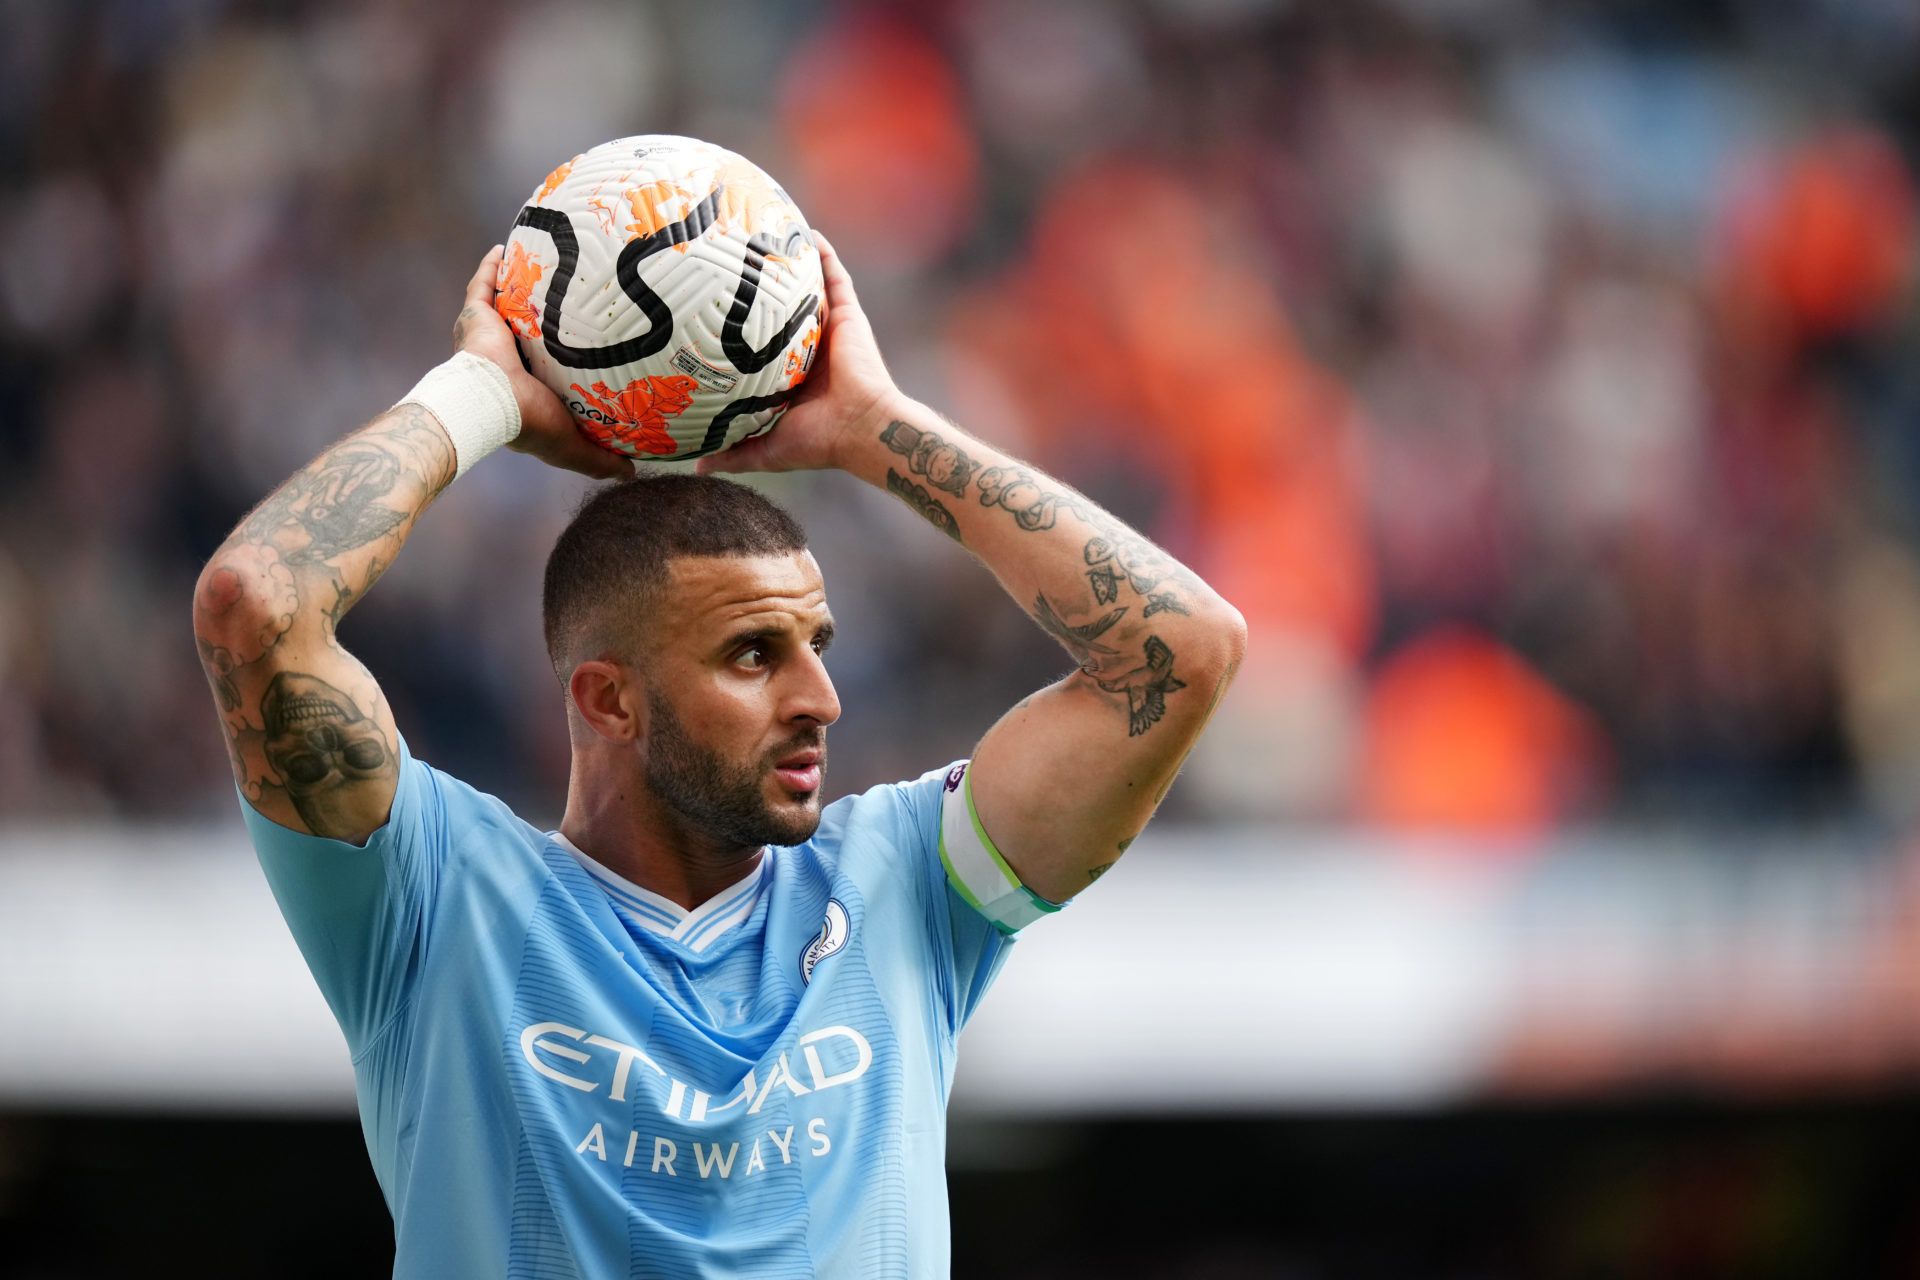 This season might have been Kyle Walker's best at Tottenham